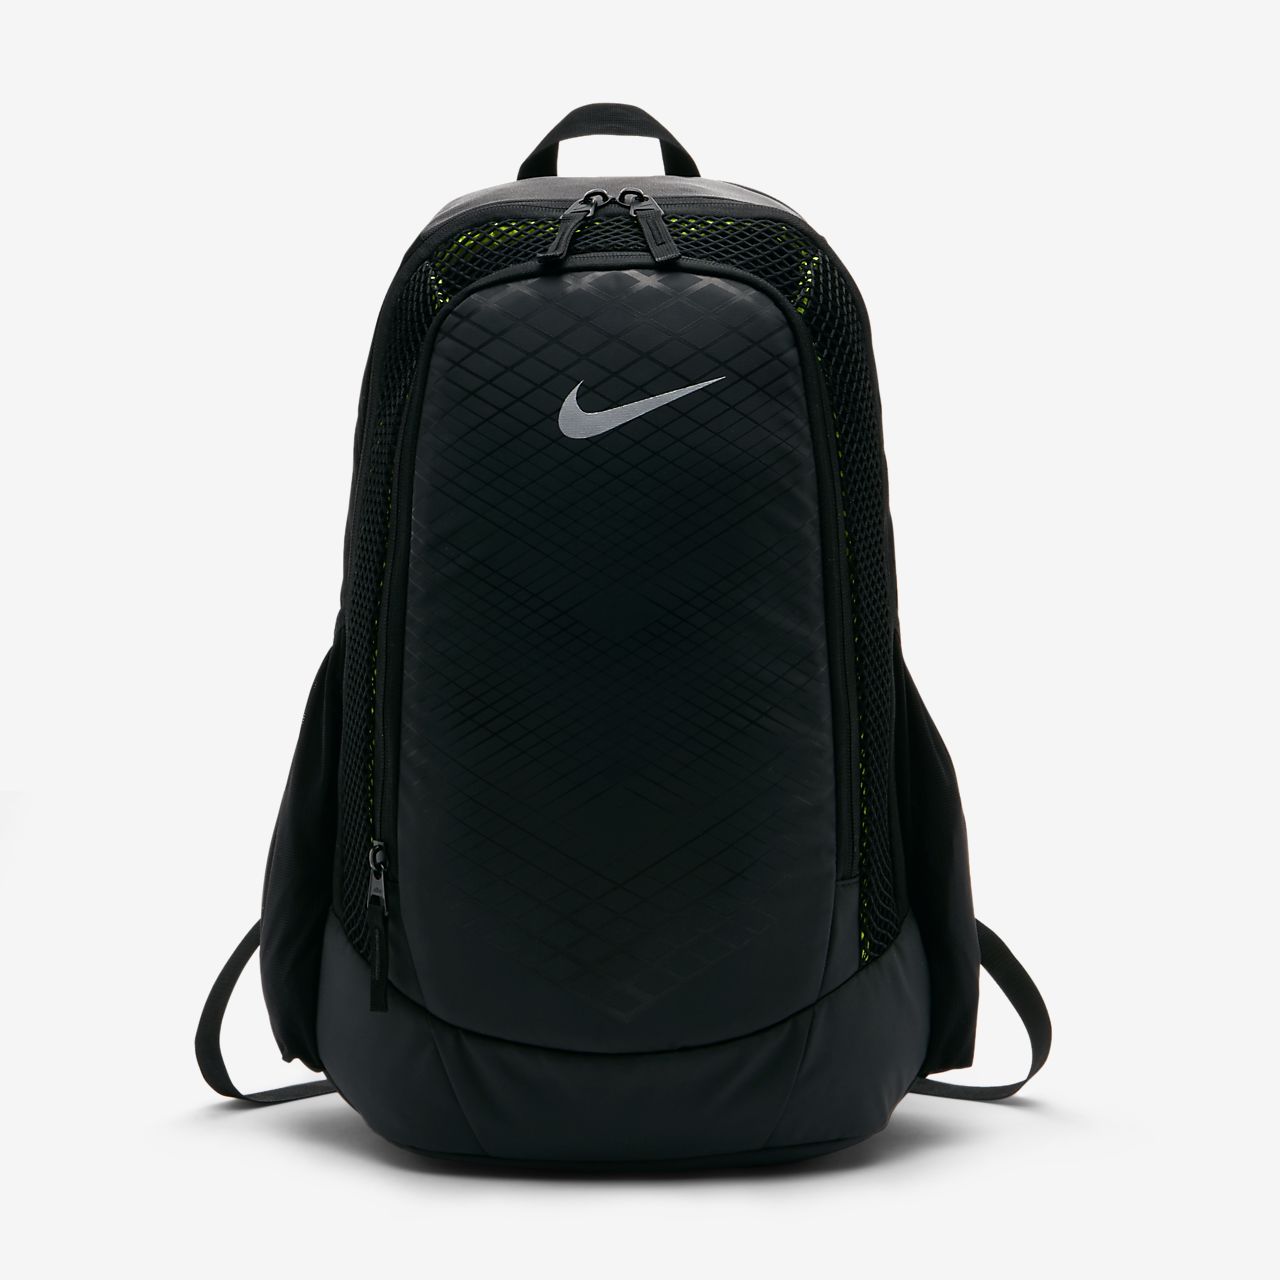 vapormax backpack Sale,up to 60% Discounts